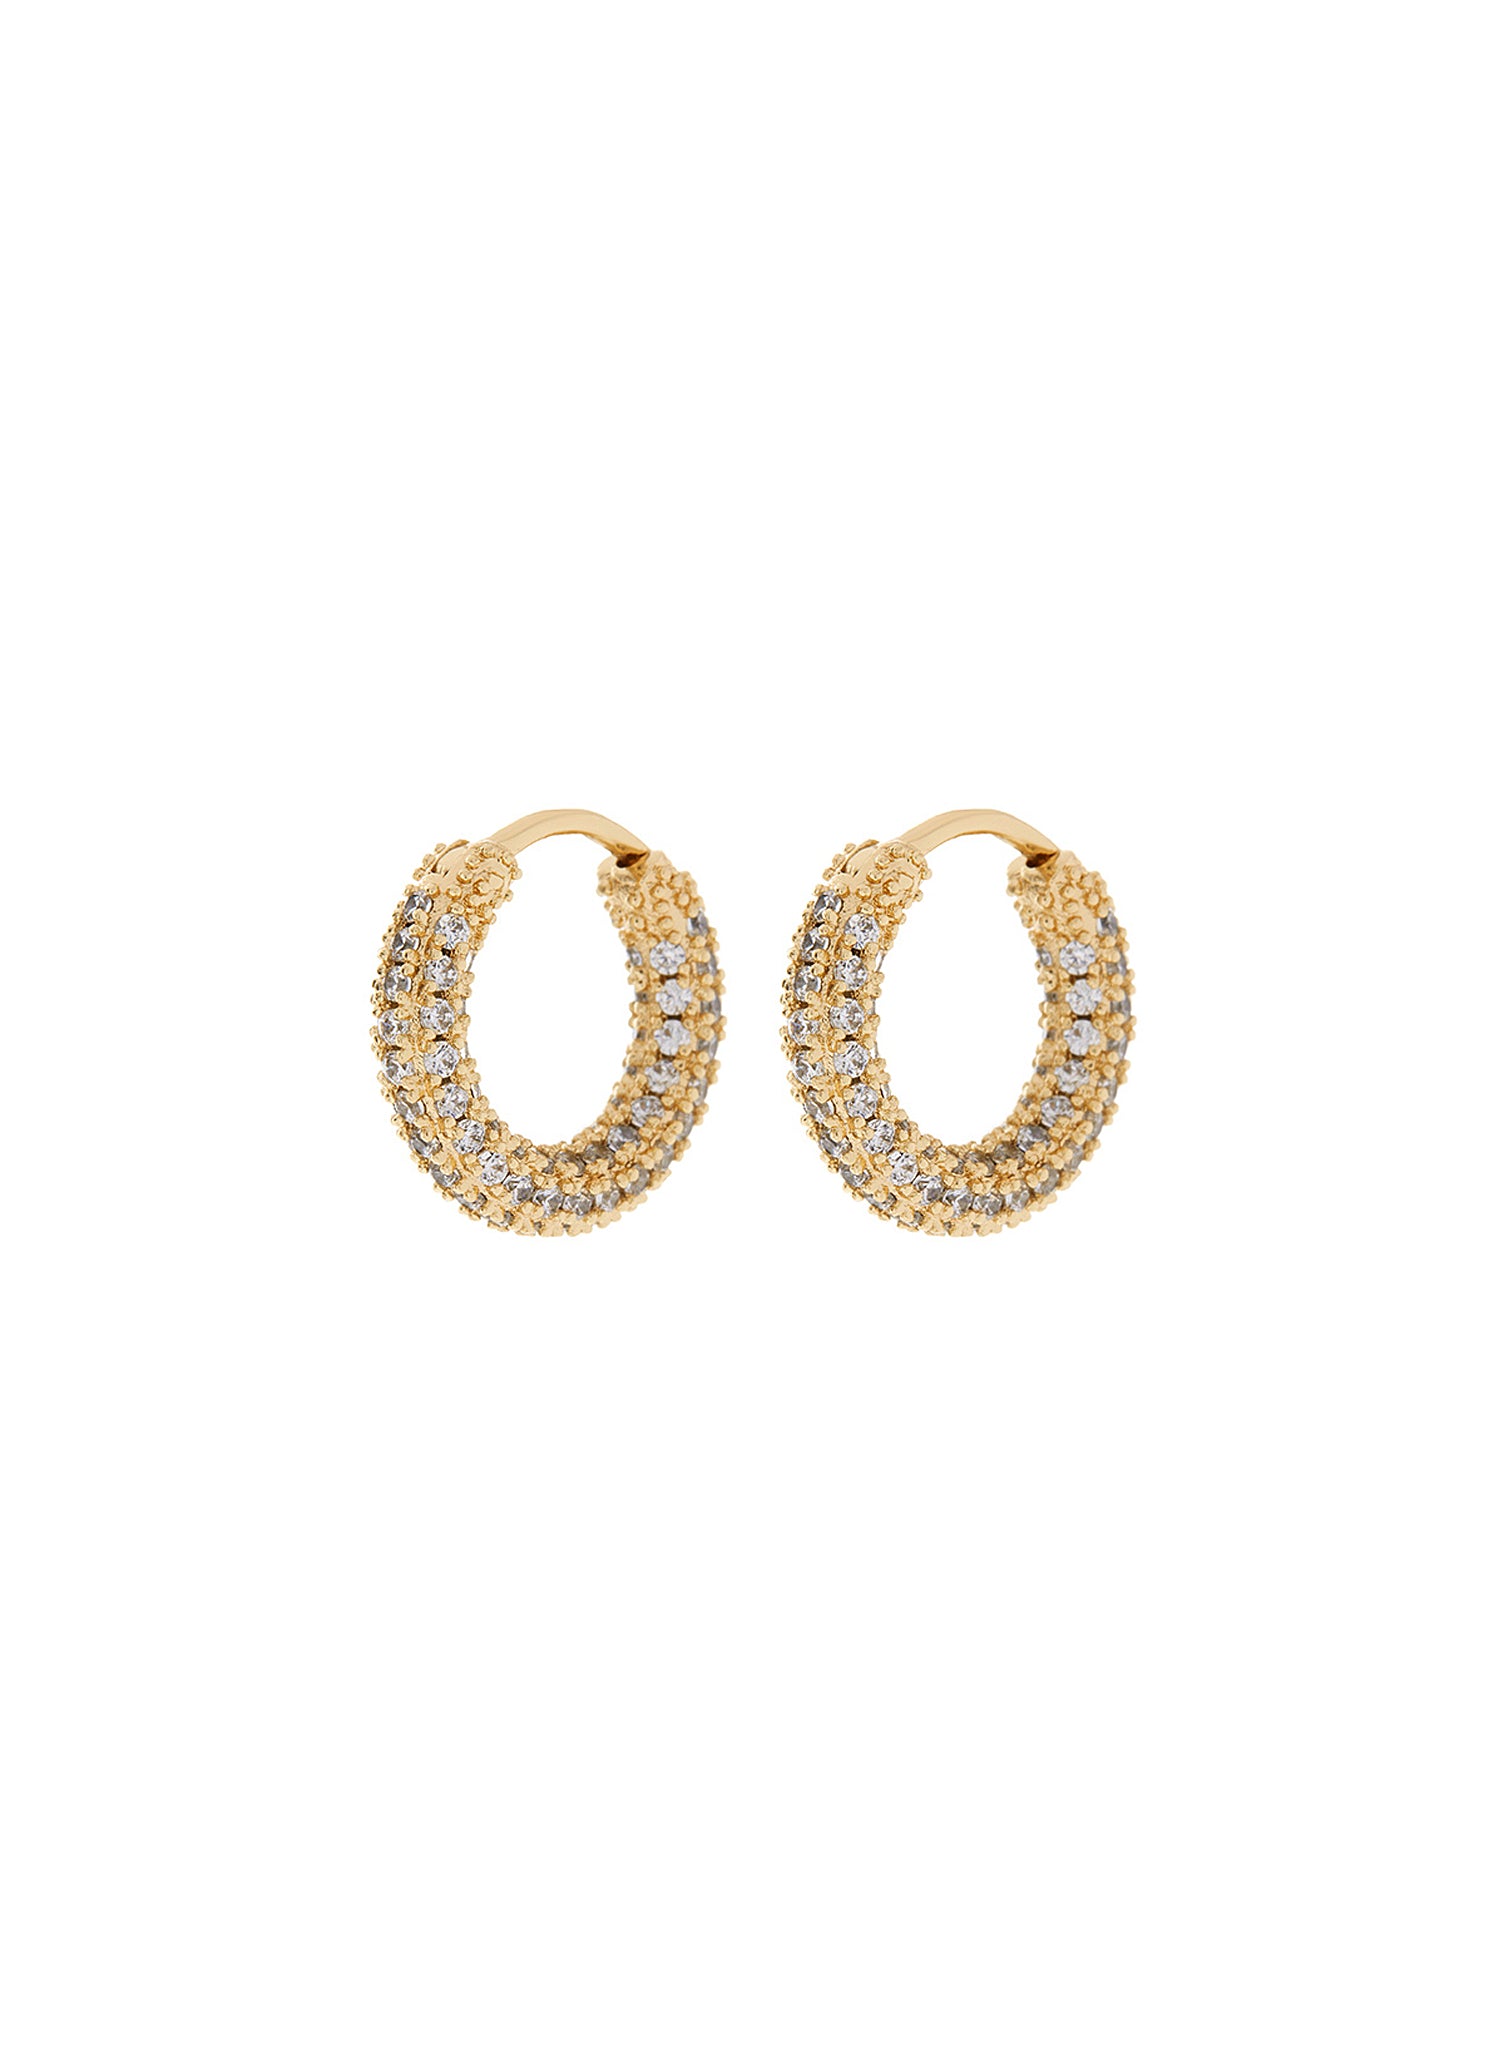 Luv Aj Pave Amalfi Huggie Hoop Earrings in CZ and Polished Gold Plated